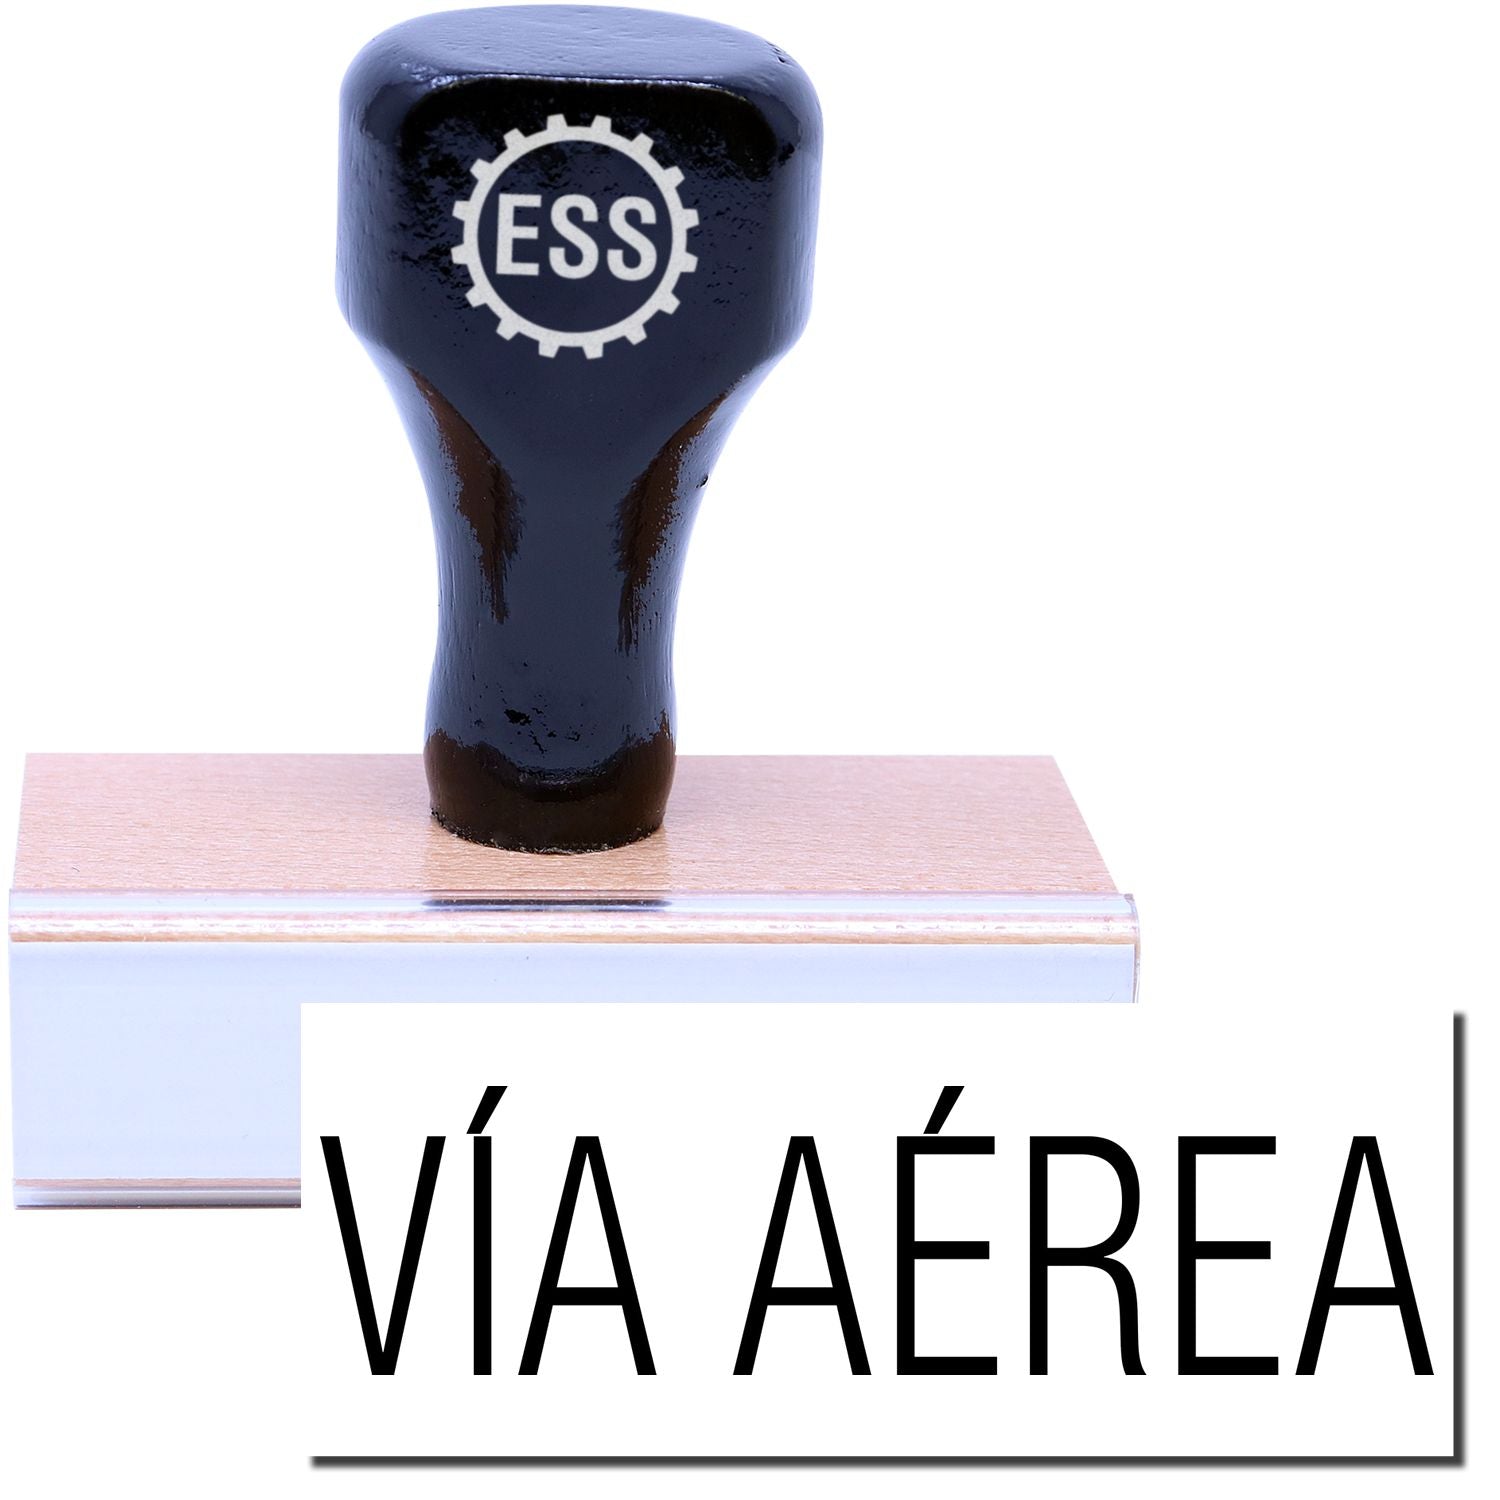 A stock office rubber stamp with a stamped image showing how the text "VIA AEREA" in a large font is displayed after stamping.